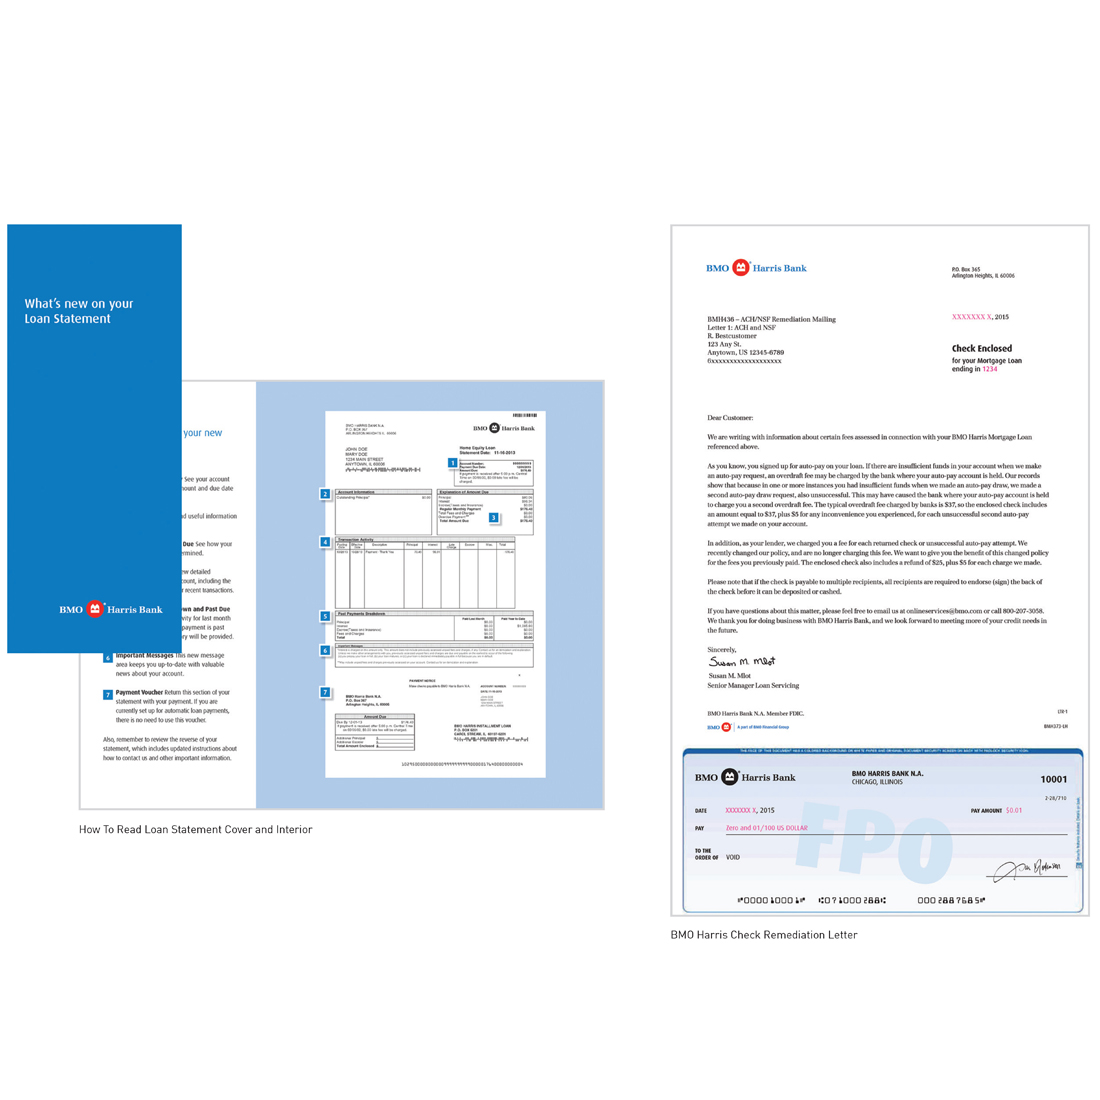 BMO Harris Bank "how to read loan statement" instructions and check remediation letter